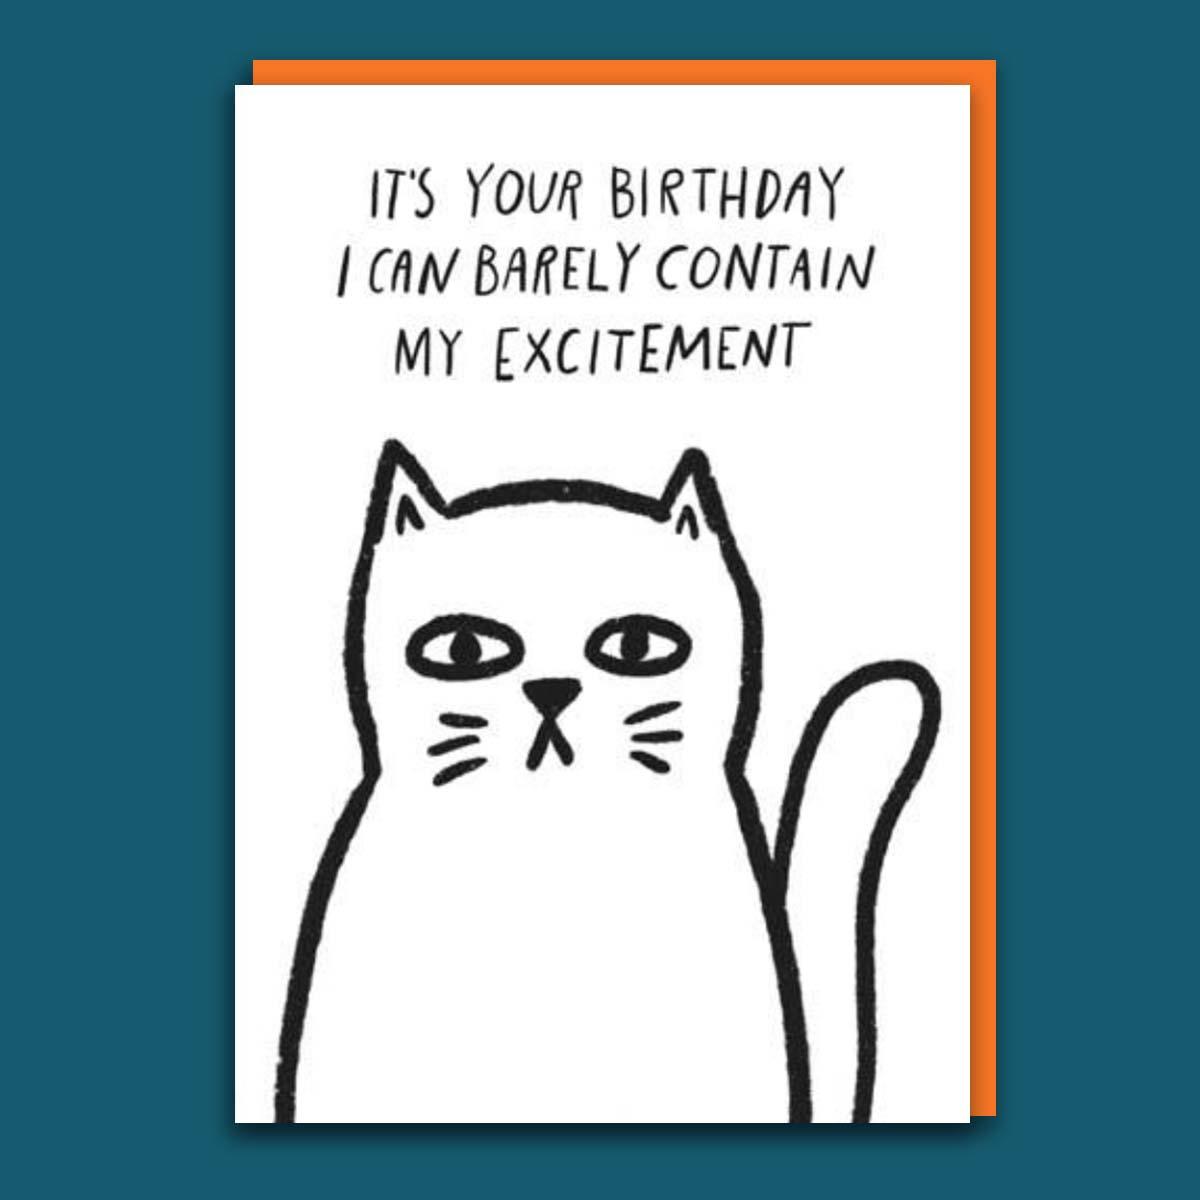 Cuckoo - Excitement Birthday Funny Greeting Card